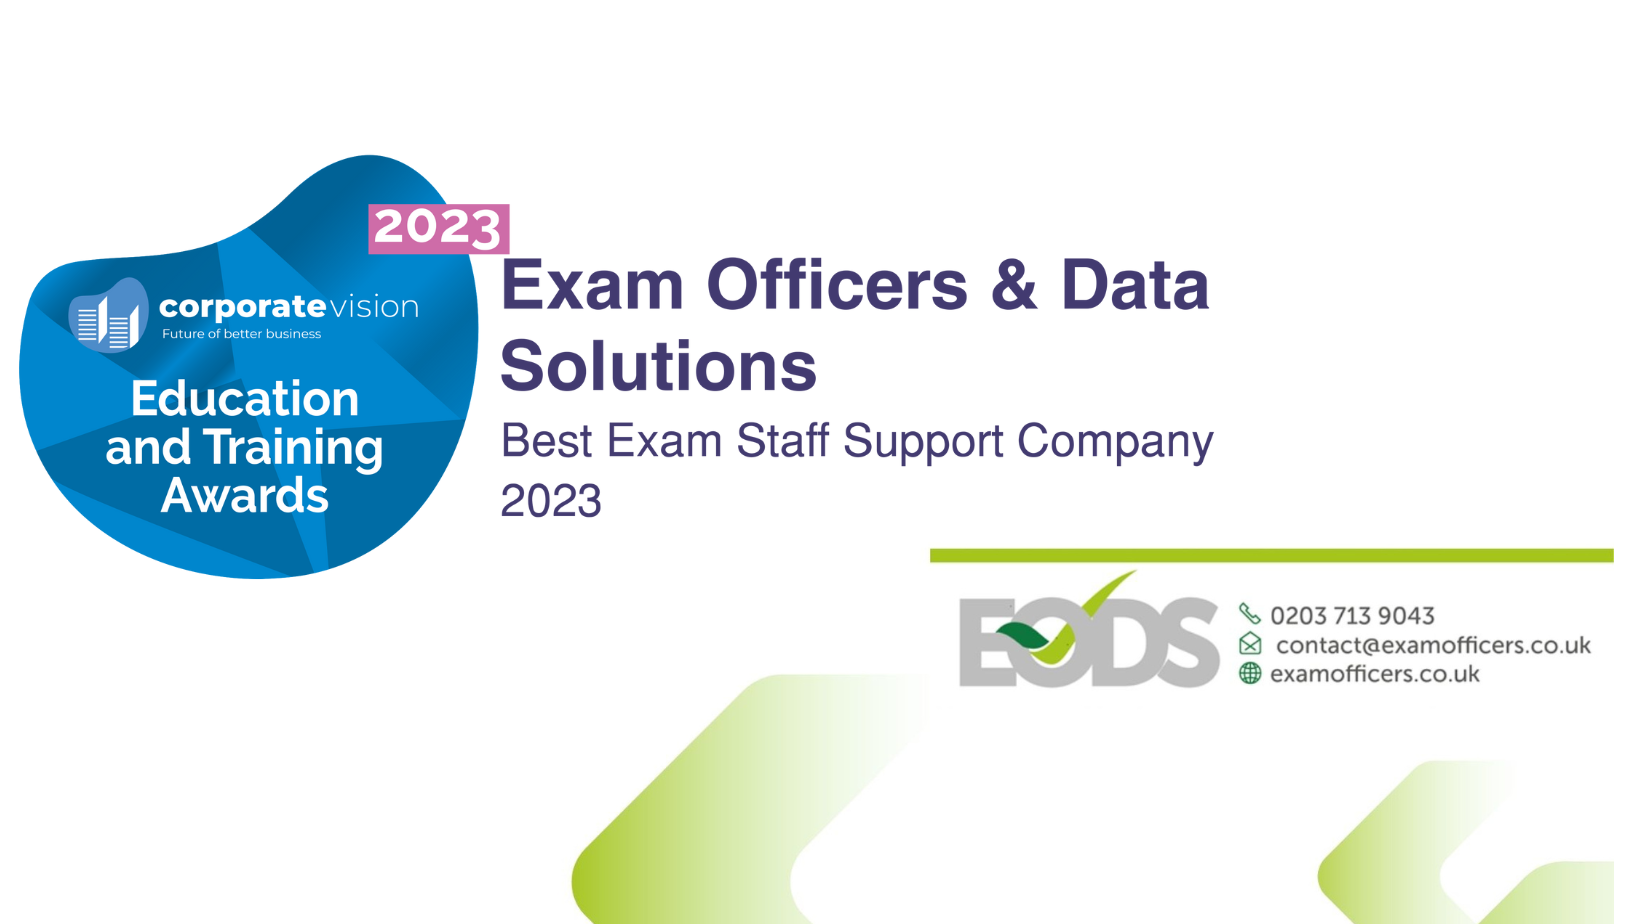 Exam Officers & Data Solutions